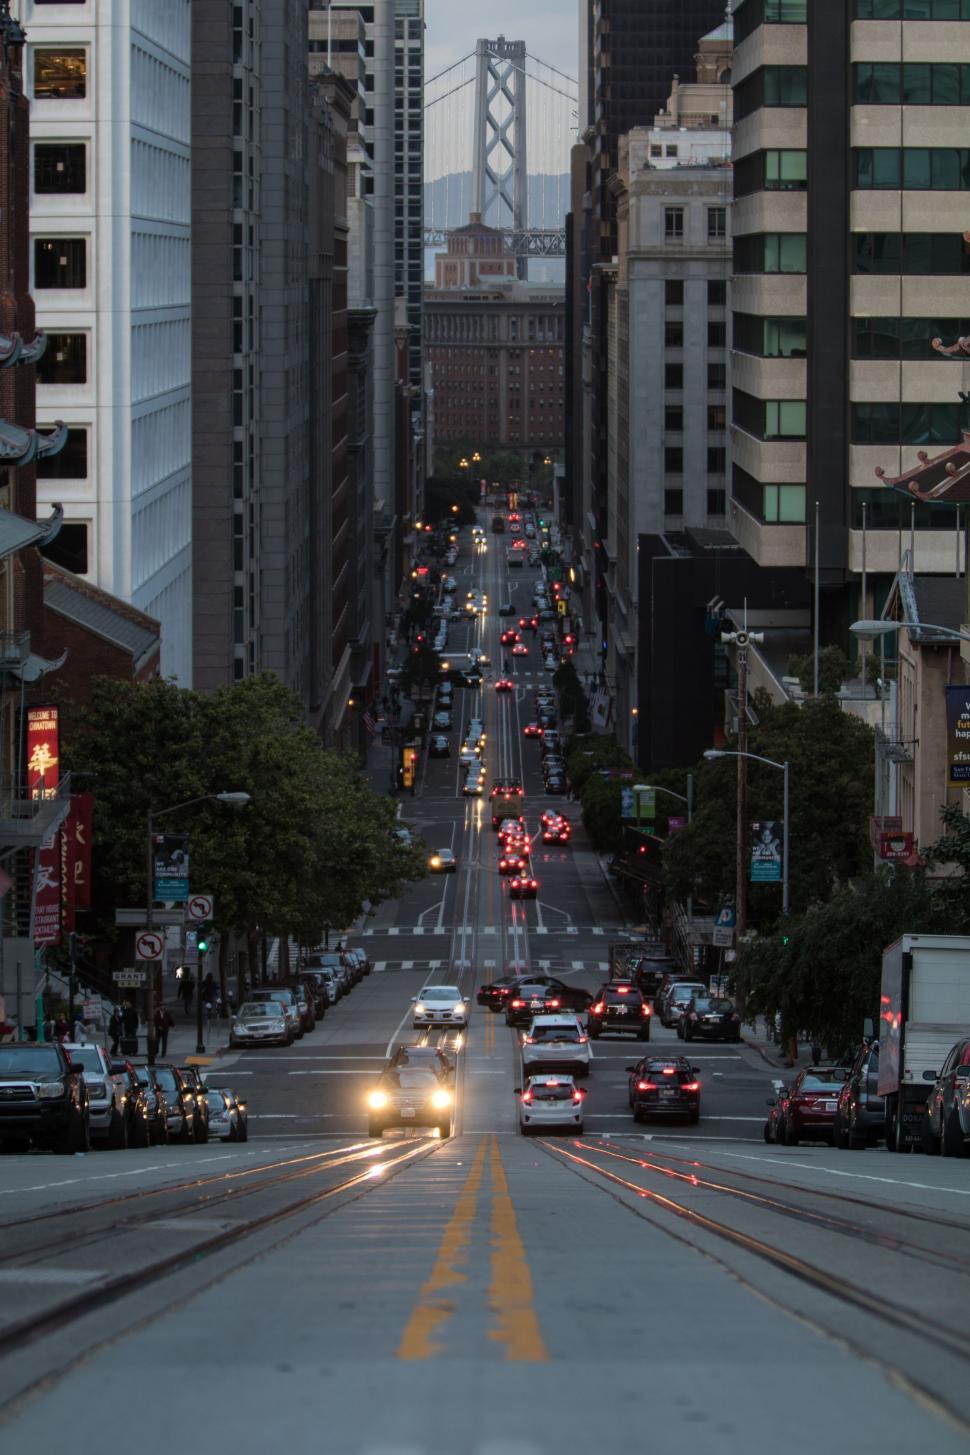 Free Image of Bustling City Street With Heavy Traffic and Tall Buildings 